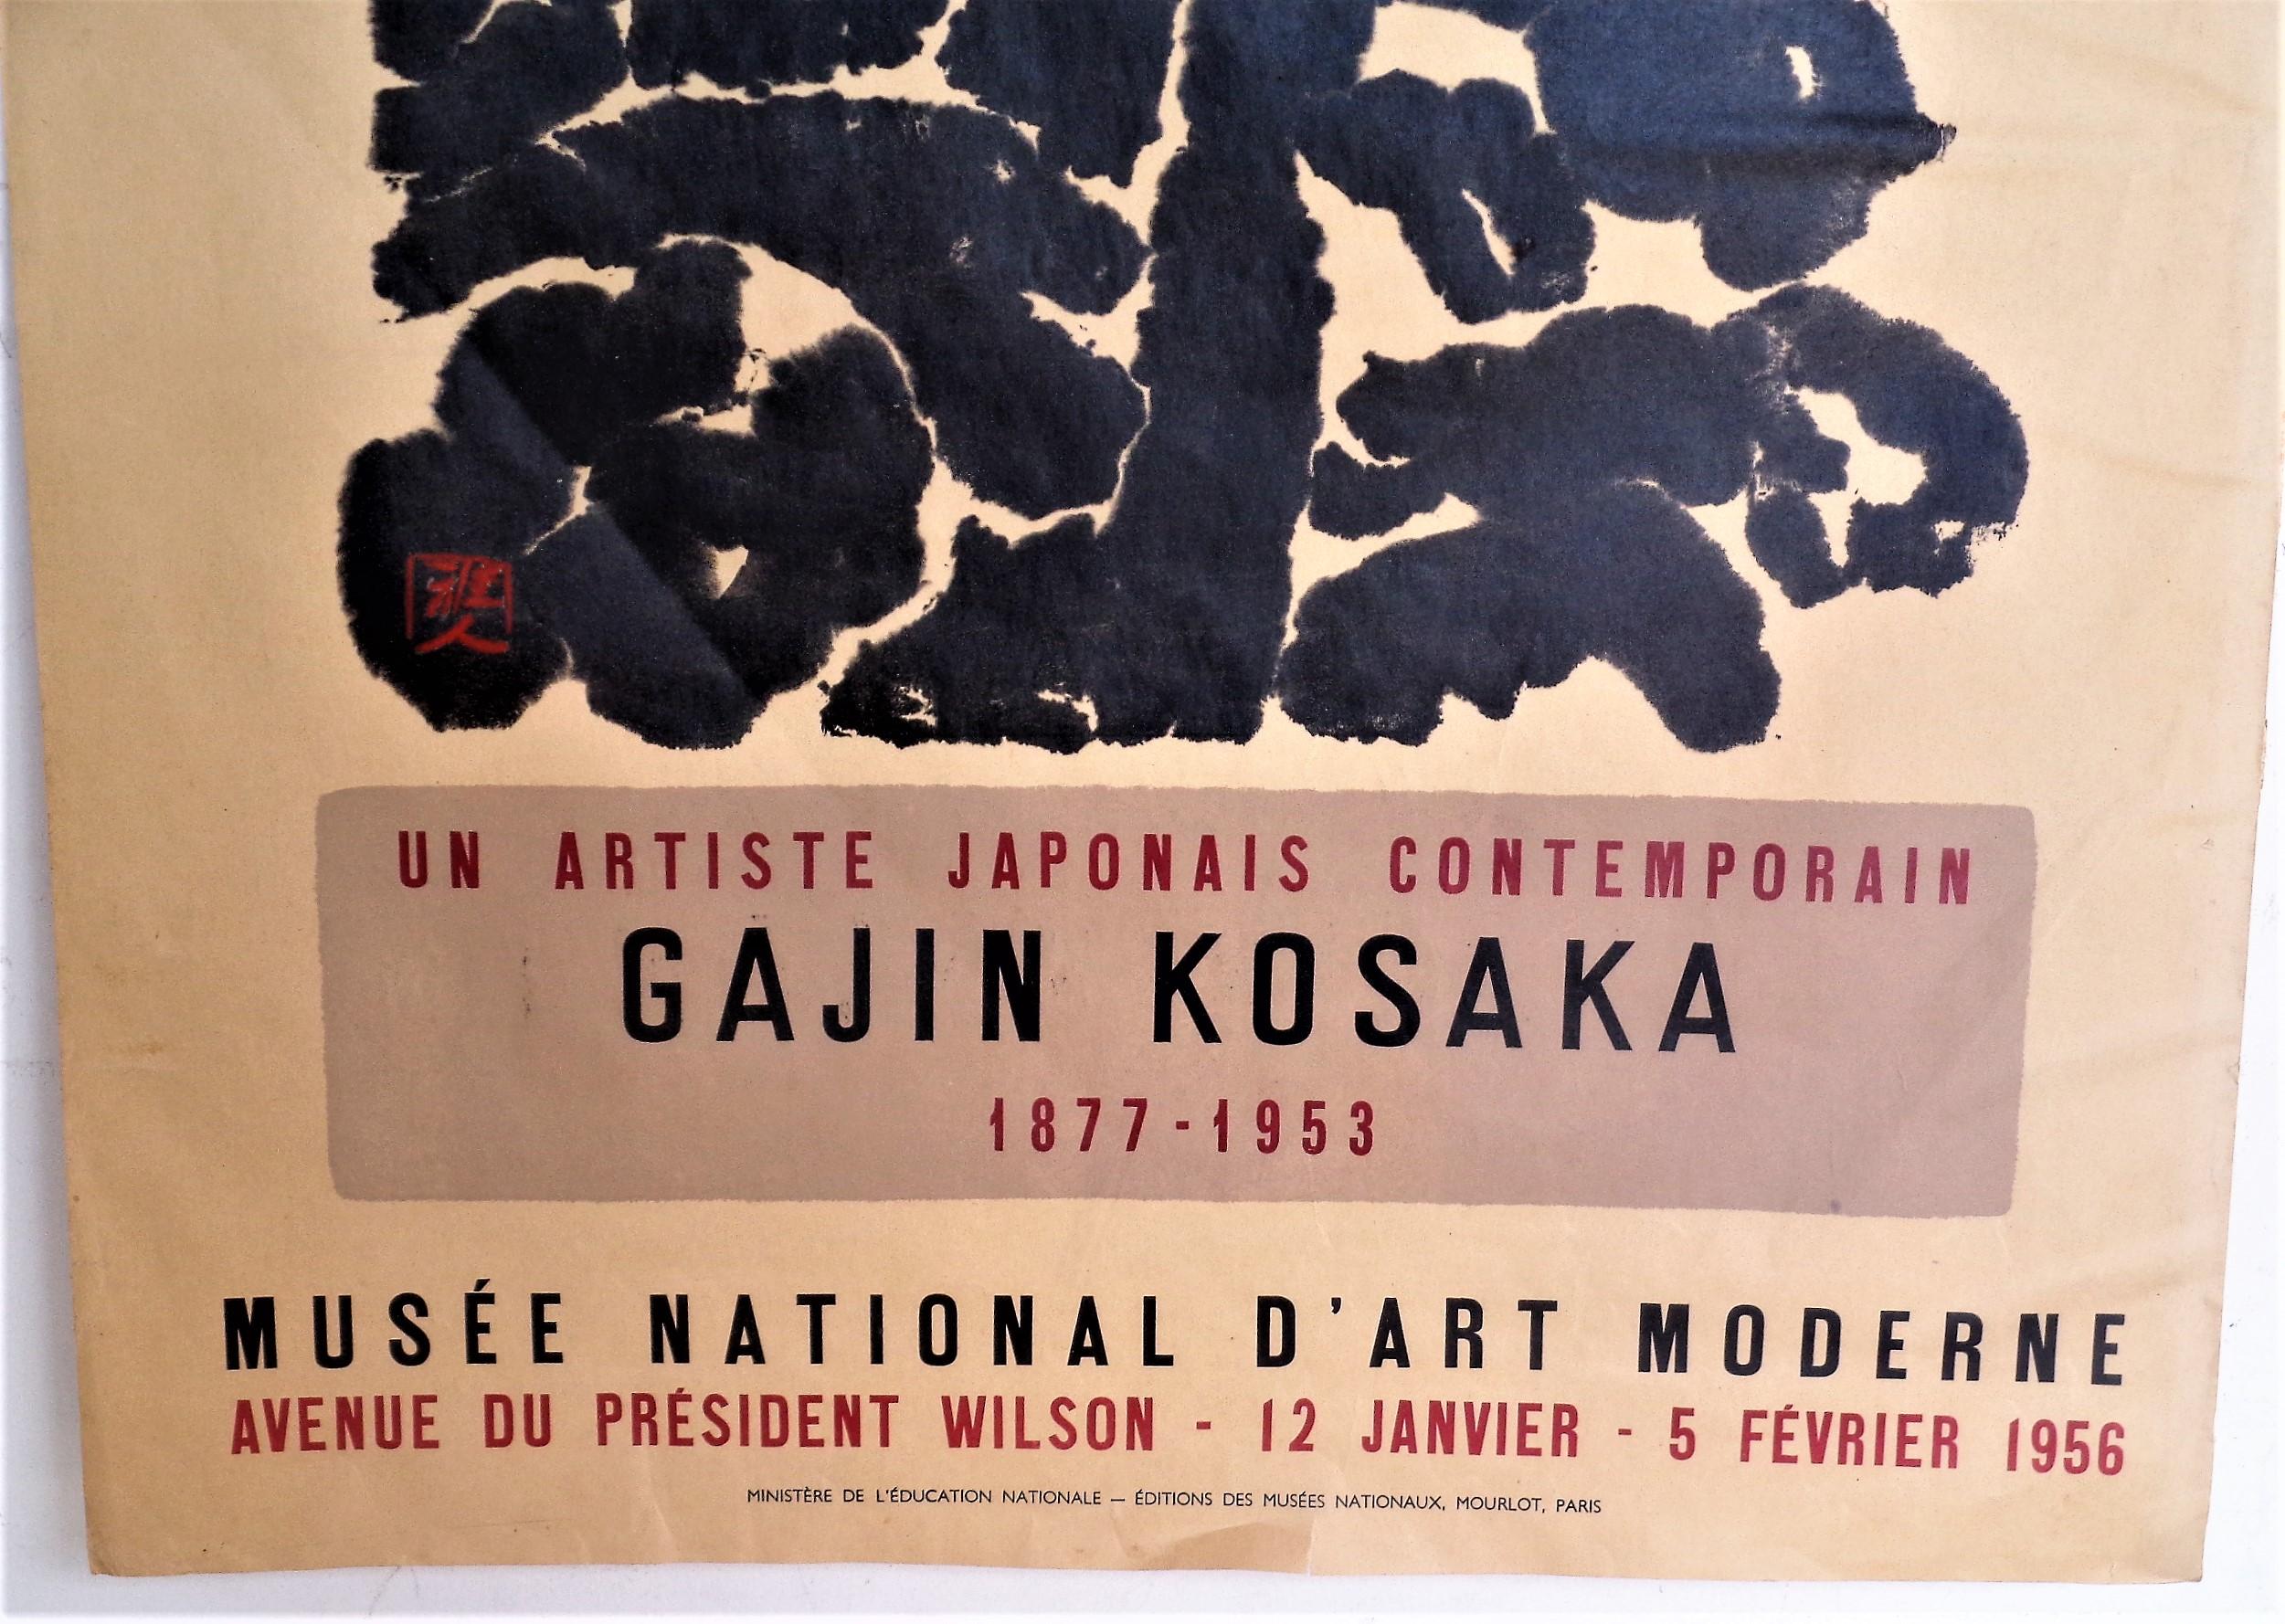 Exhibition poster- Gajin Kosaka - Un Artiste Japonais Contemporain, Musee National D'Art Moderne - Paris, France - 1956. Lithograph printed by Mourlot. Look at all pictures and read condition report in comment section.